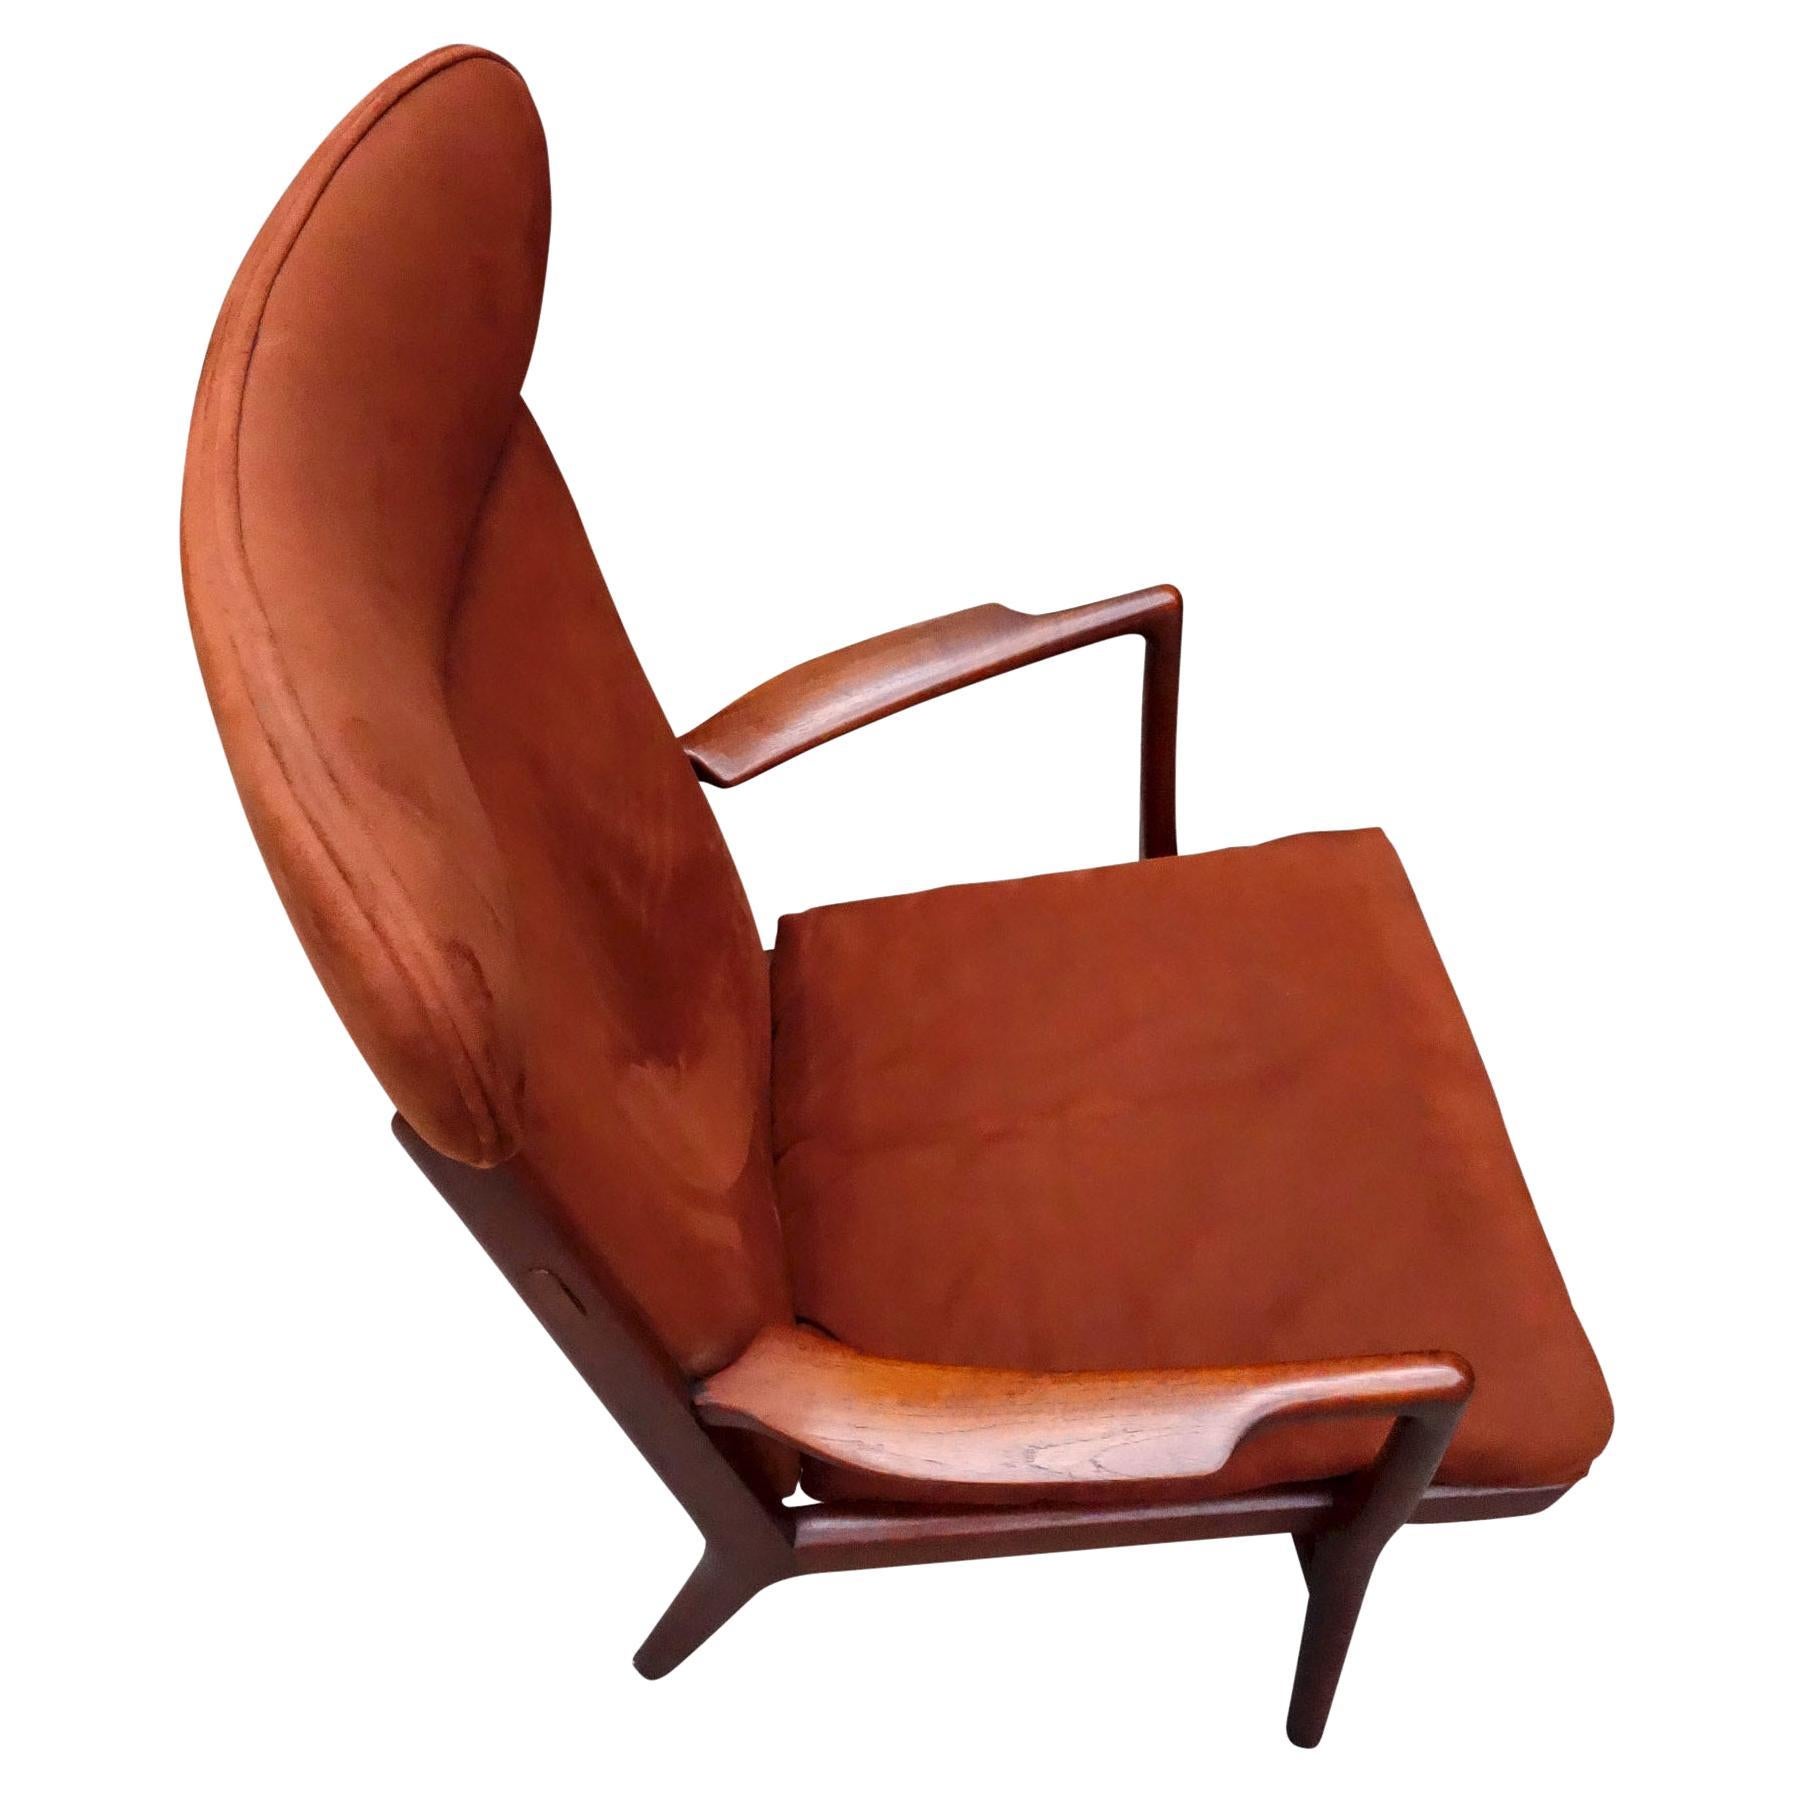 For your condition is this amazingly comfortable lounge chair by Hans Wegner. Model AP-15 (A.P Stolen) imported by George Tanier. This rare model chair features teak wood with stunning original patina. Excellent craftsmanship along with beautifully